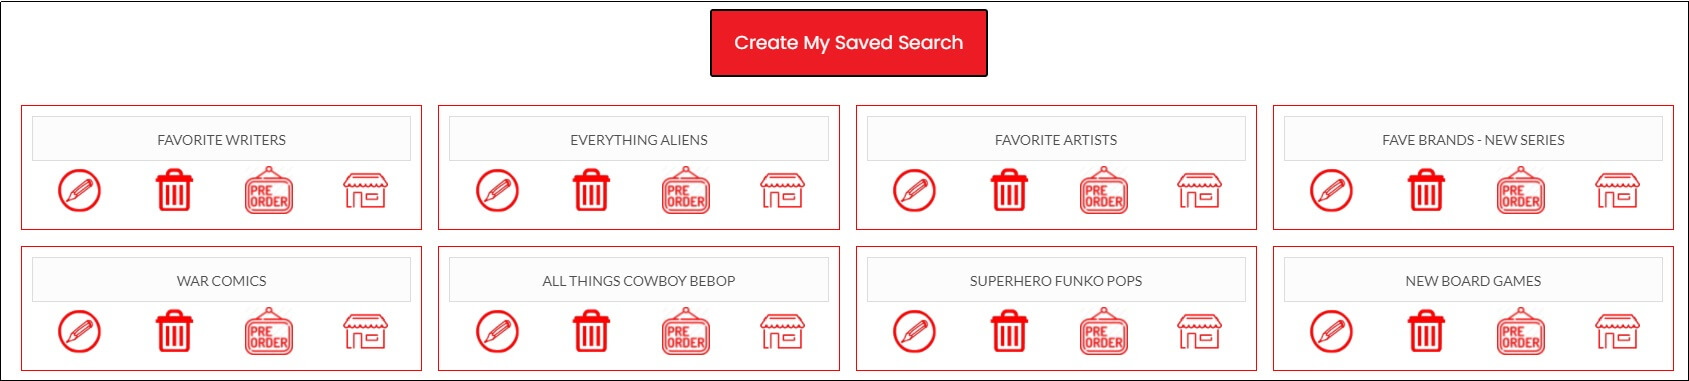 image for saved search collection 